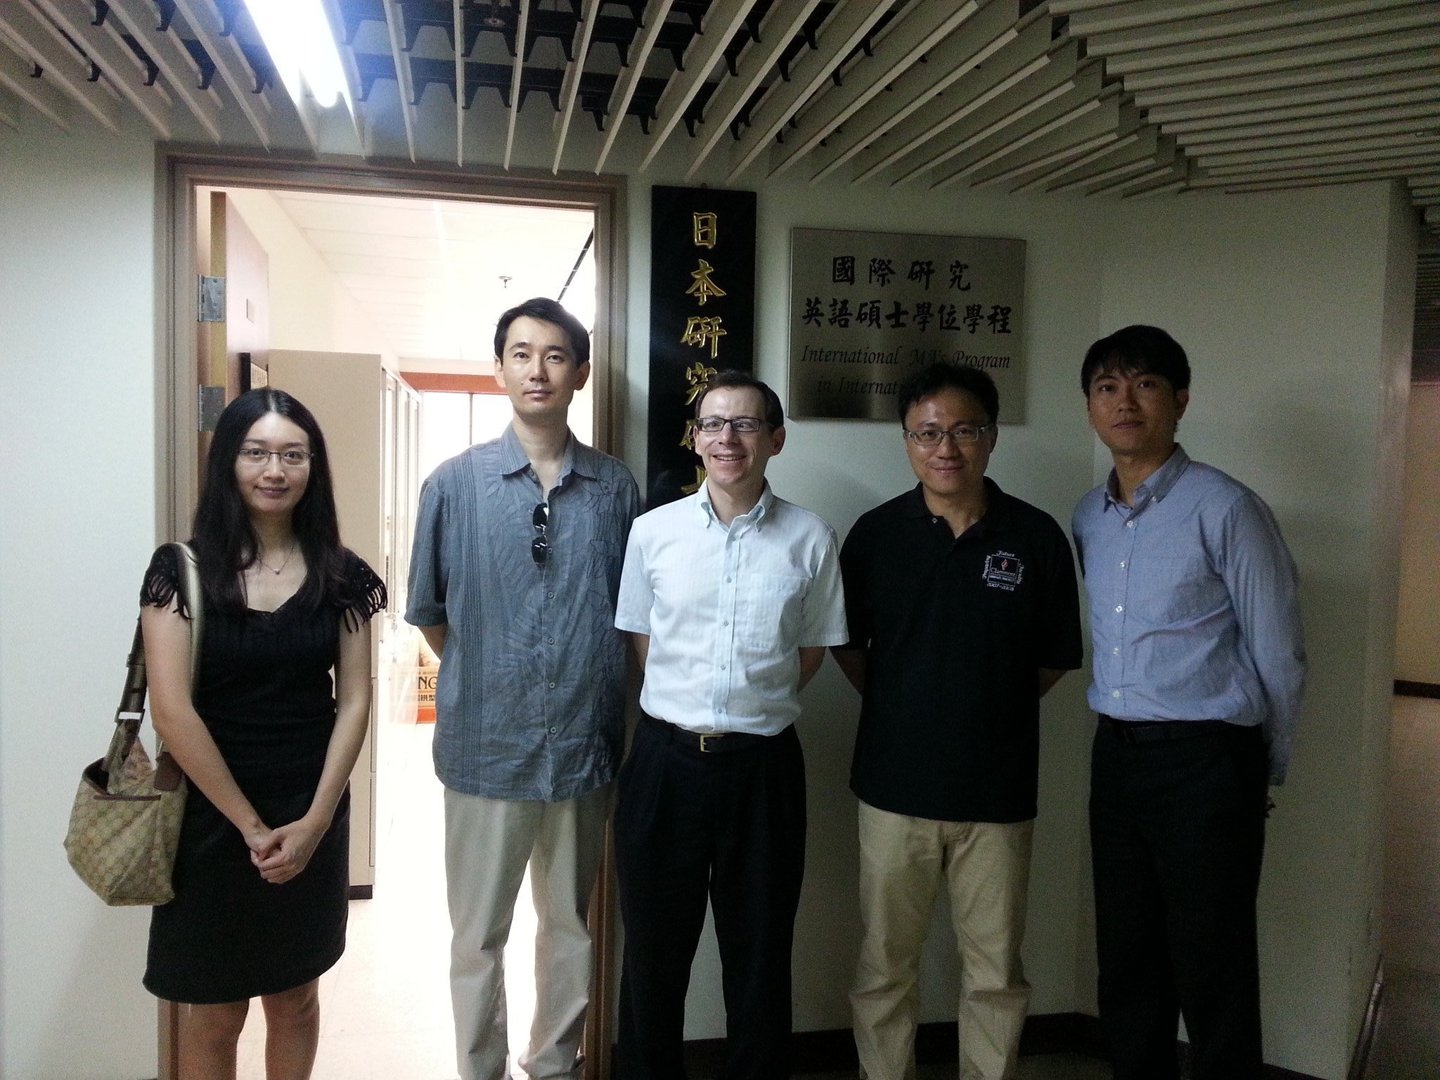 6-7-2013 Dr. Jacques E. C. Hymans and assistant Ronan T. Fu visit Director Kwei-Bo Huang